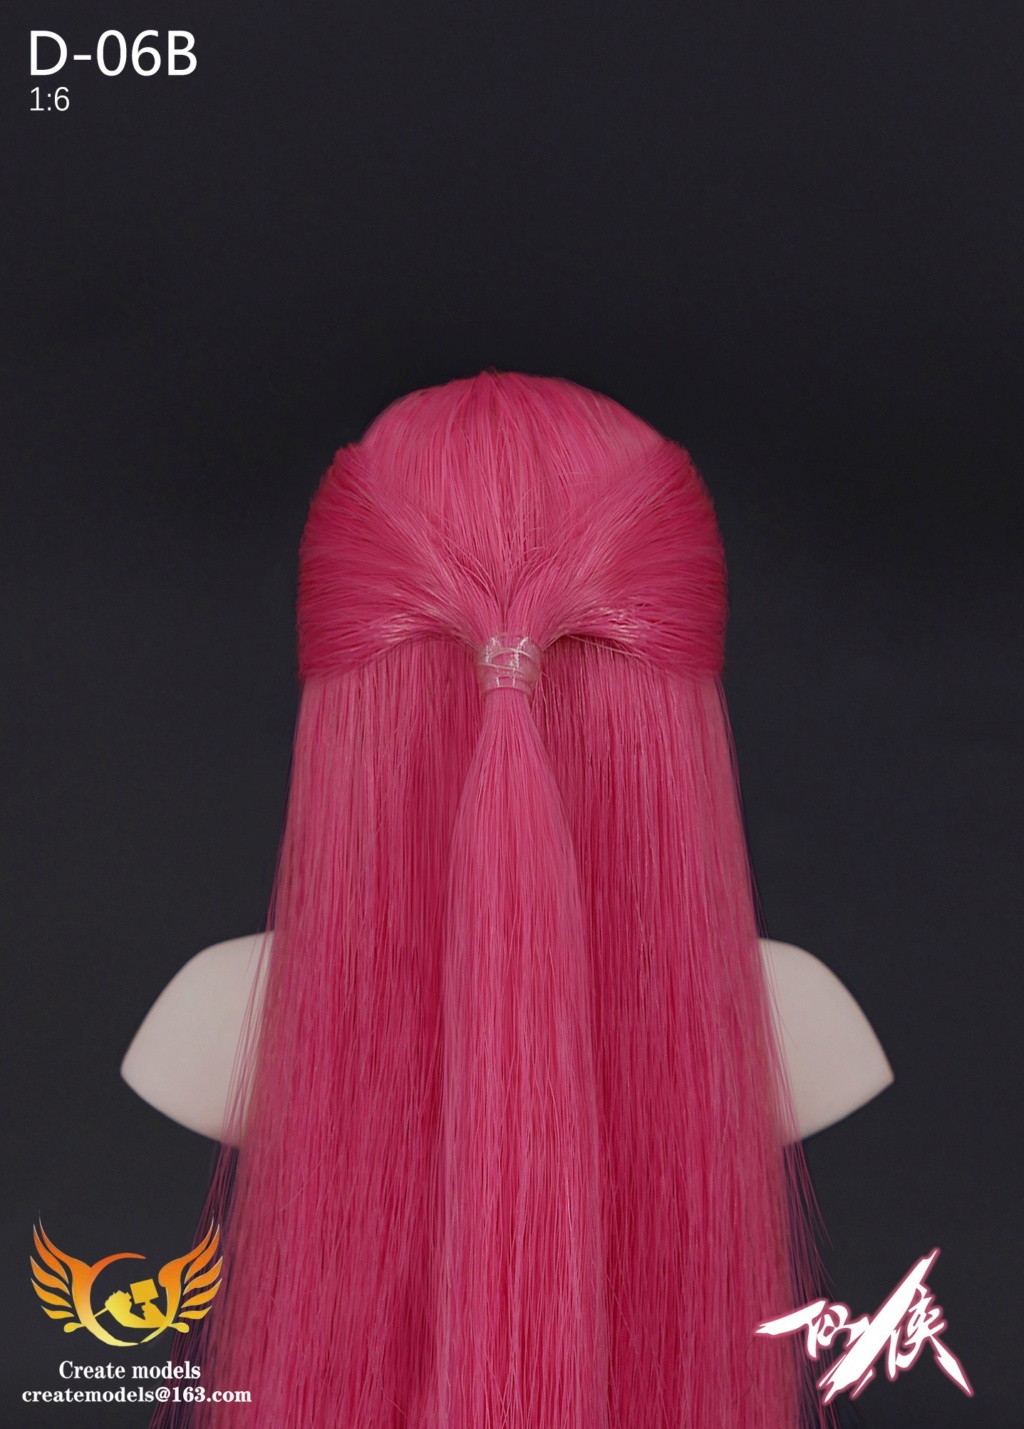 Fantasy - NEW PRODUCT: Createmodels: 1/6 Xianxia series female head - AB two hair colors (D-06) 15341210